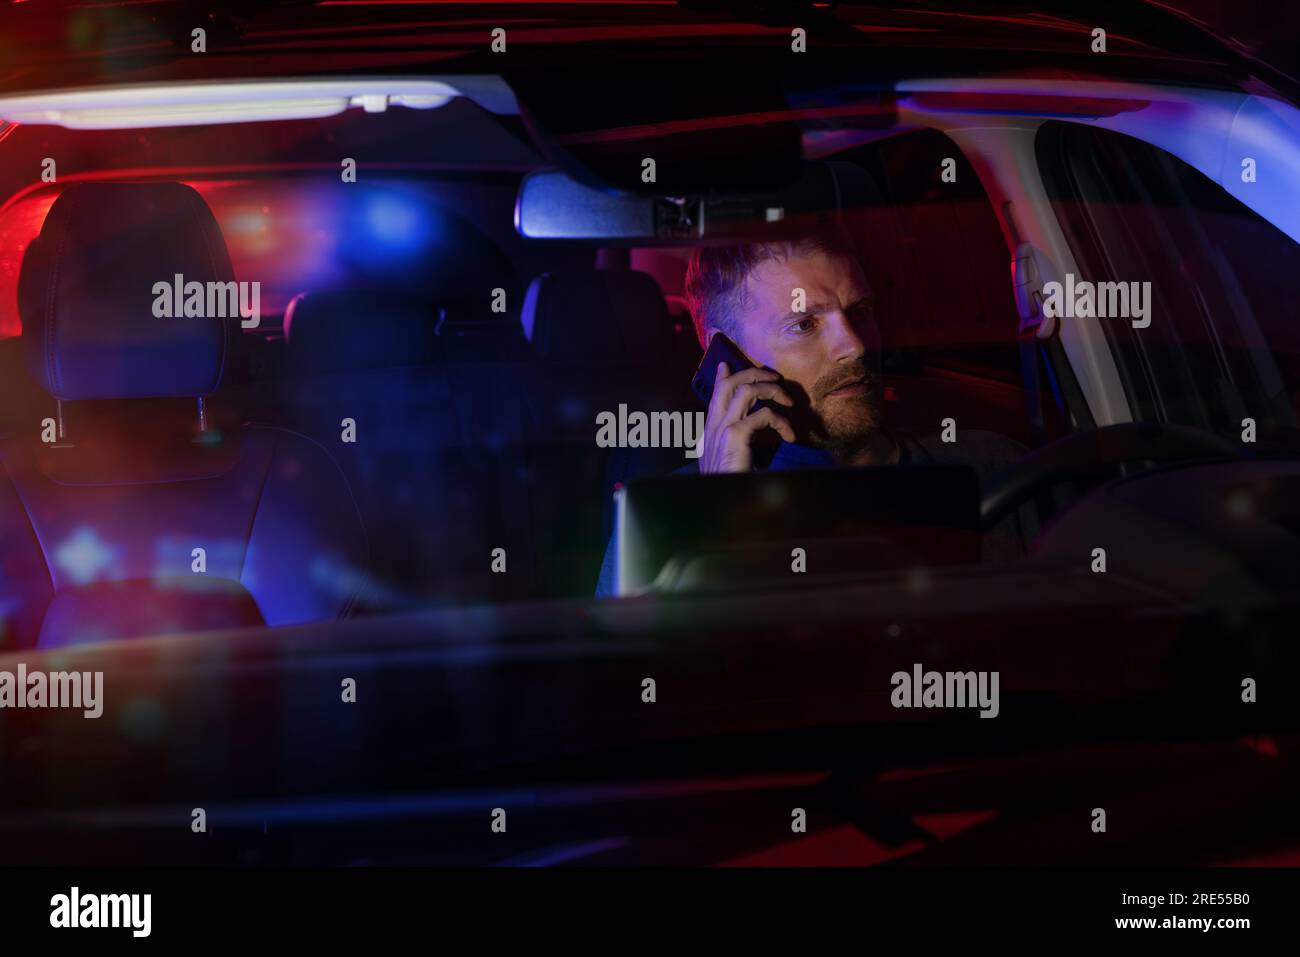 man sitting inside a car and talking on the phone after being stopped by police at night Stock Photo